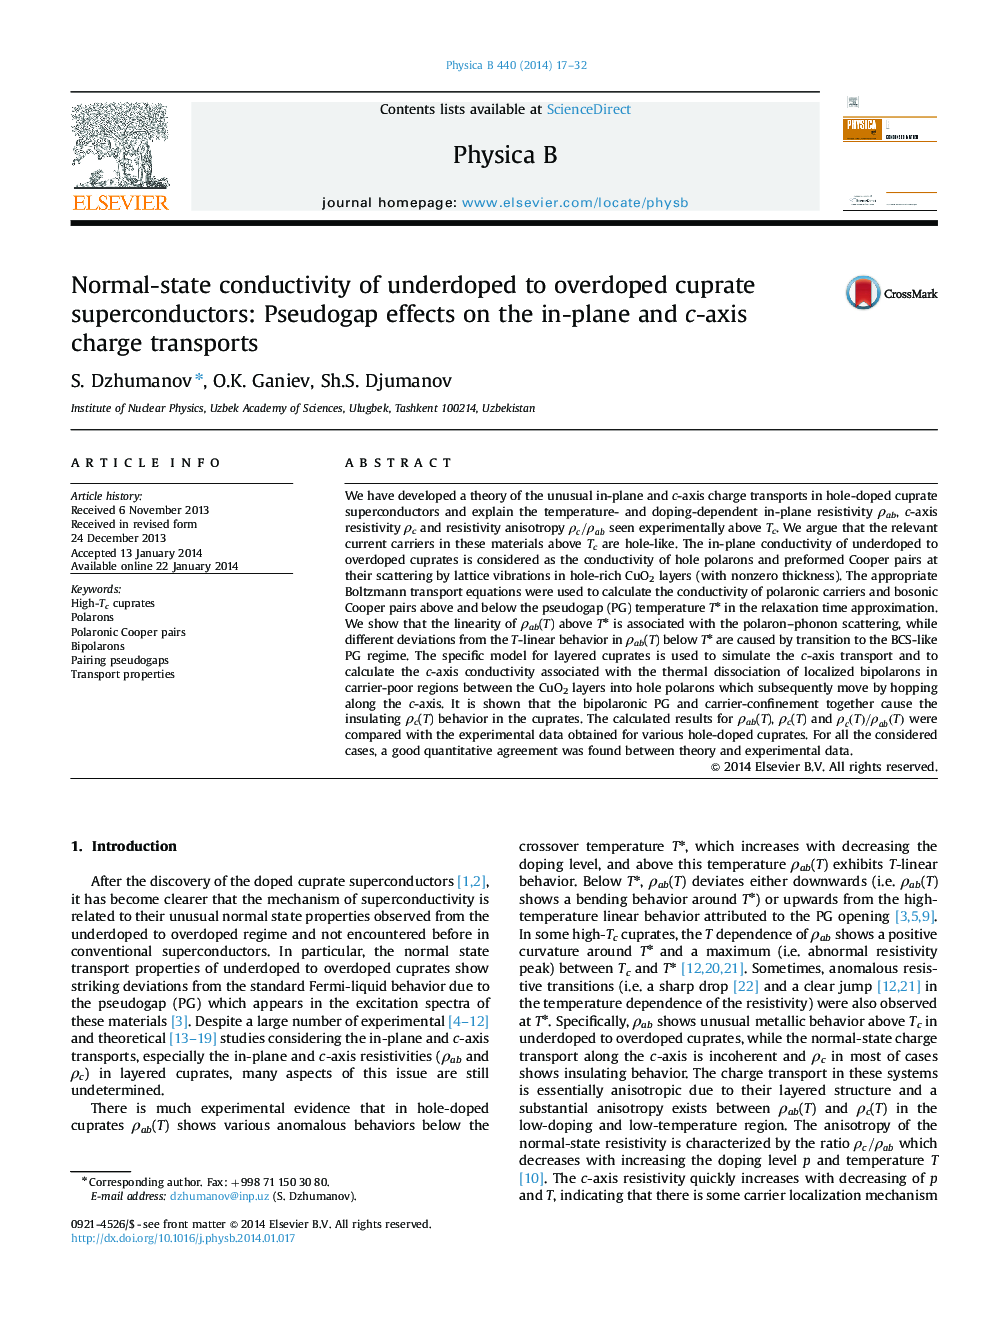 Normal-state conductivity of underdoped to overdoped cuprate superconductors: Pseudogap effects on the in-plane and c-axis charge transports